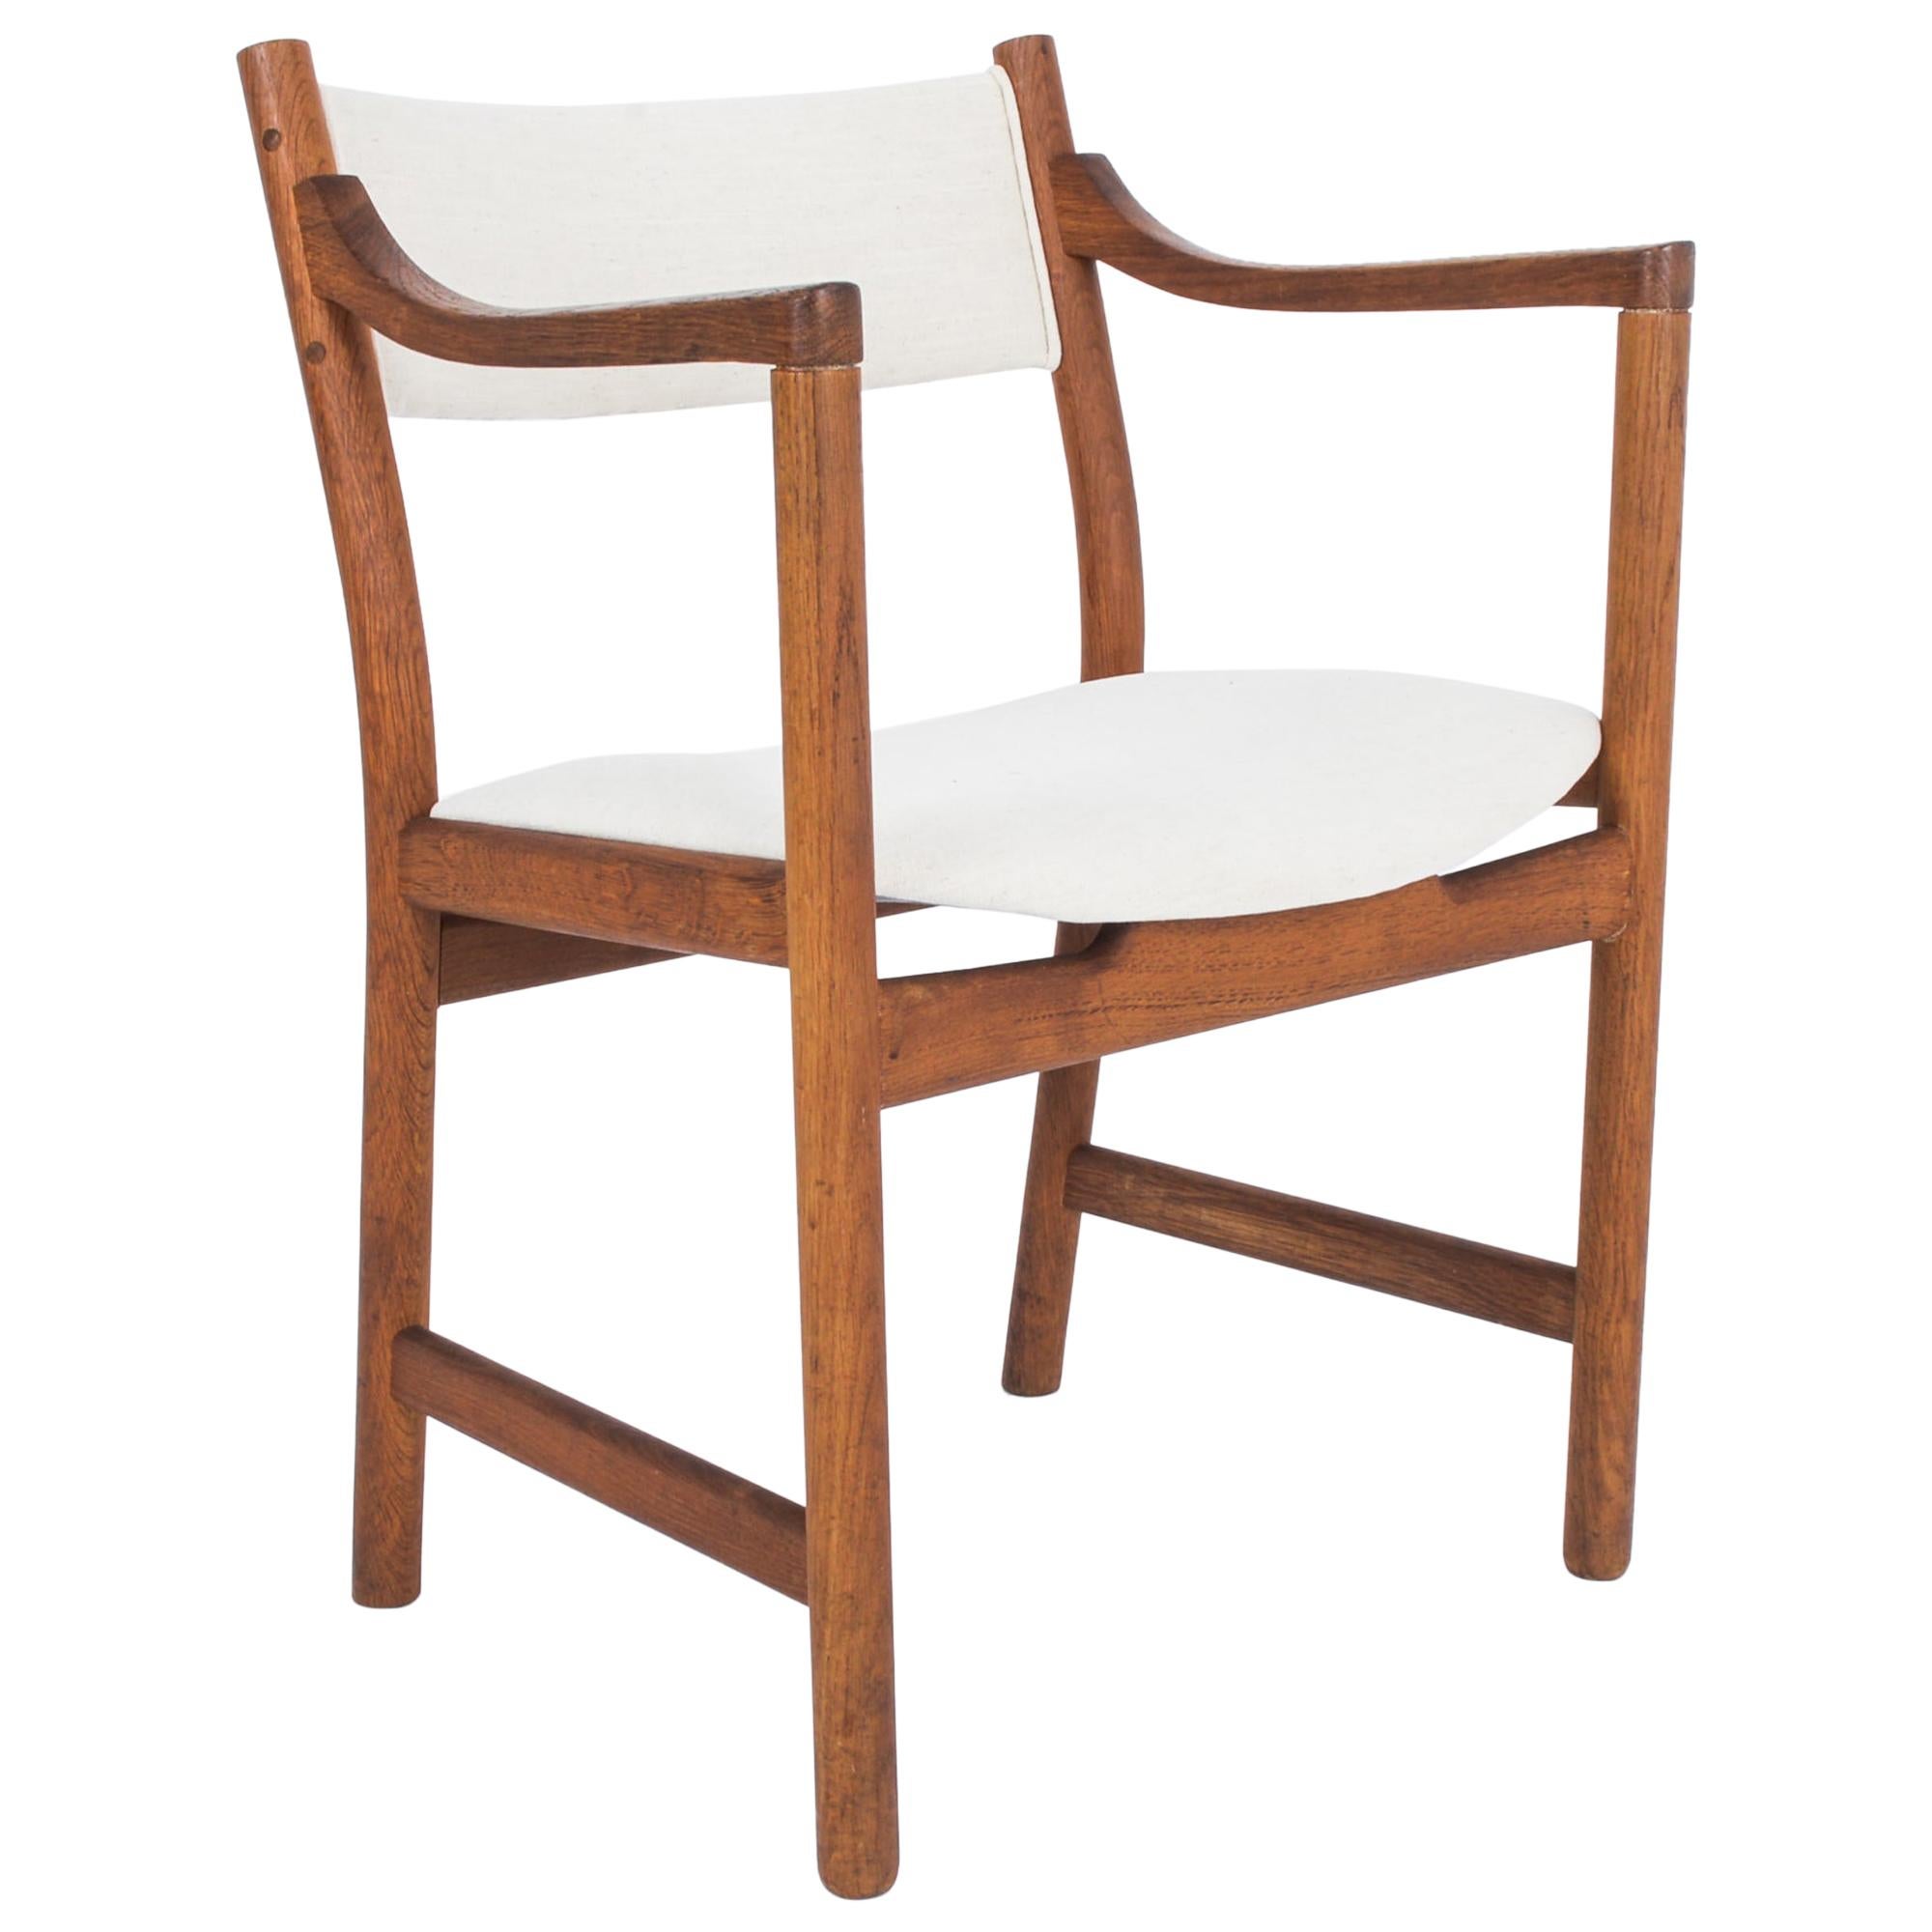 1960s Danish Teak Side Chair with White Upholstery